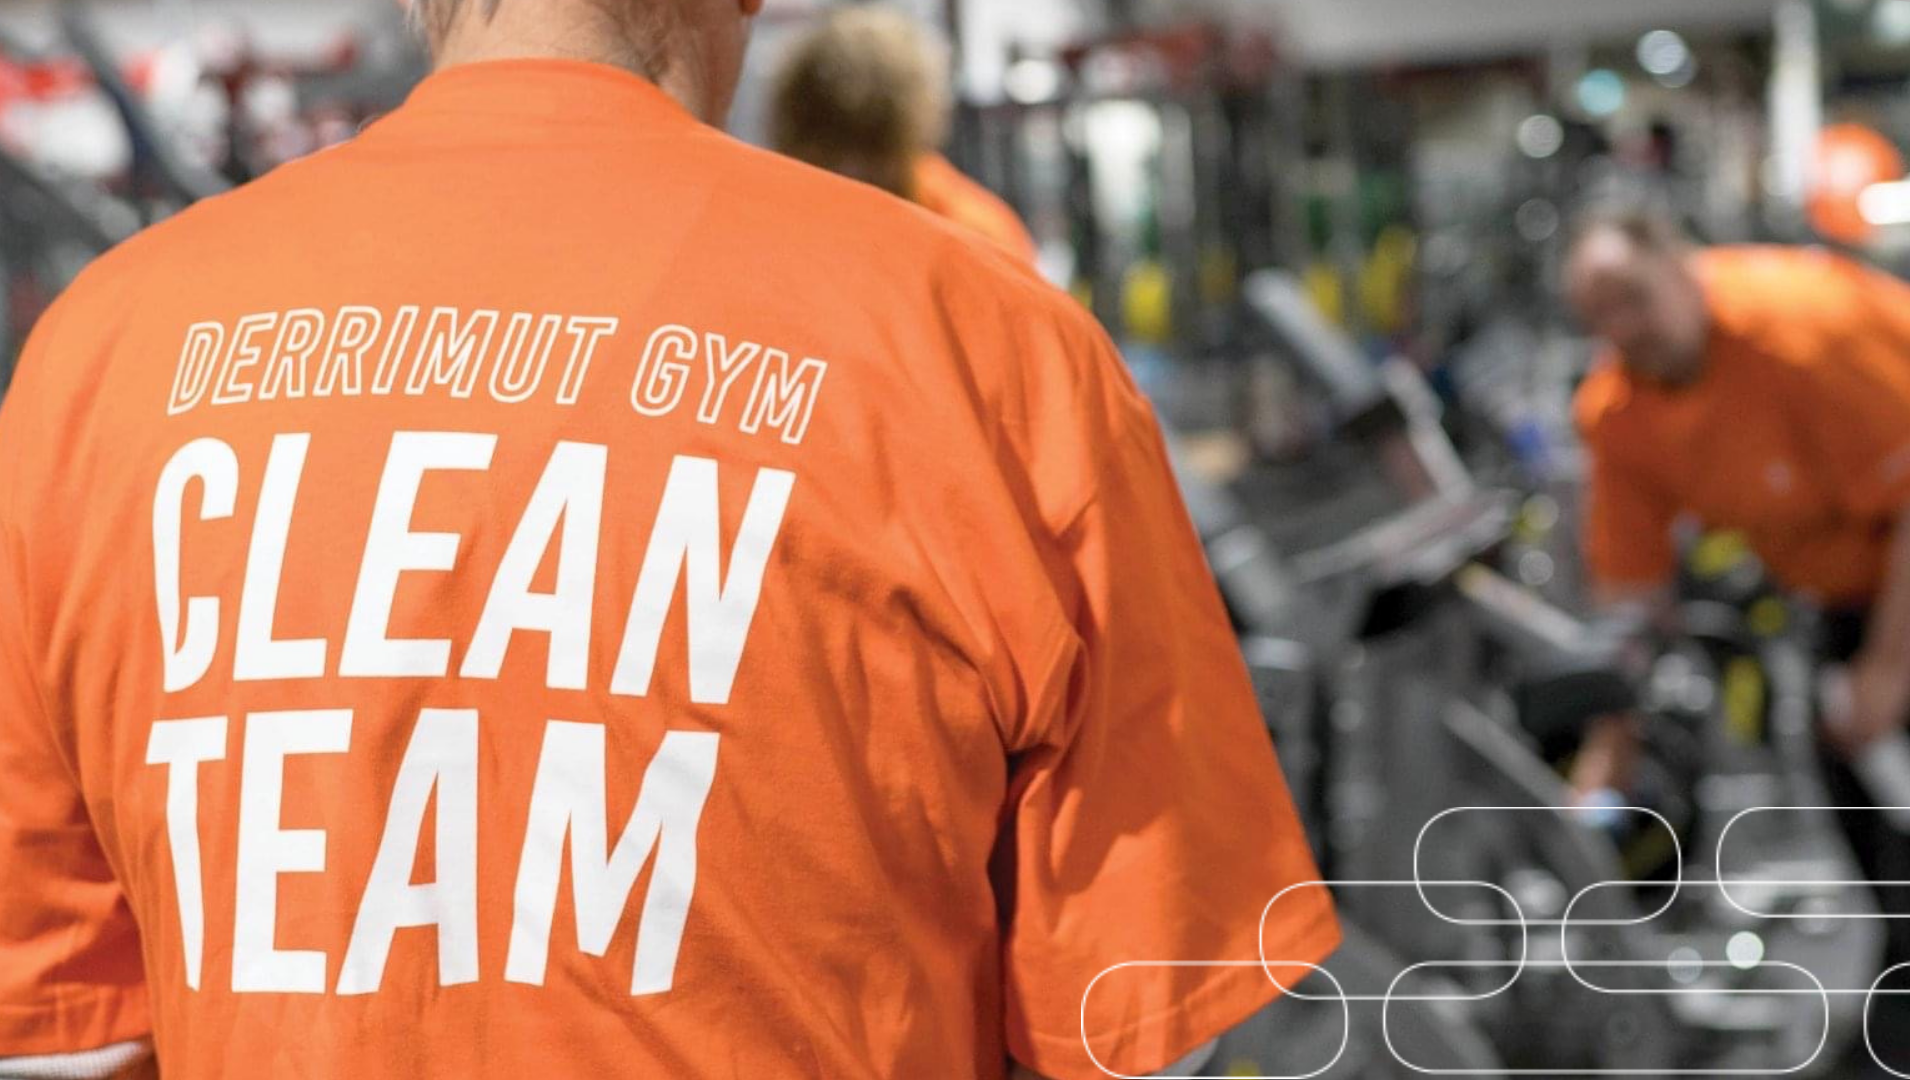 One of the members of the clean team wearing an orange tshirt with the wording "of the Derrimut clean team" on it